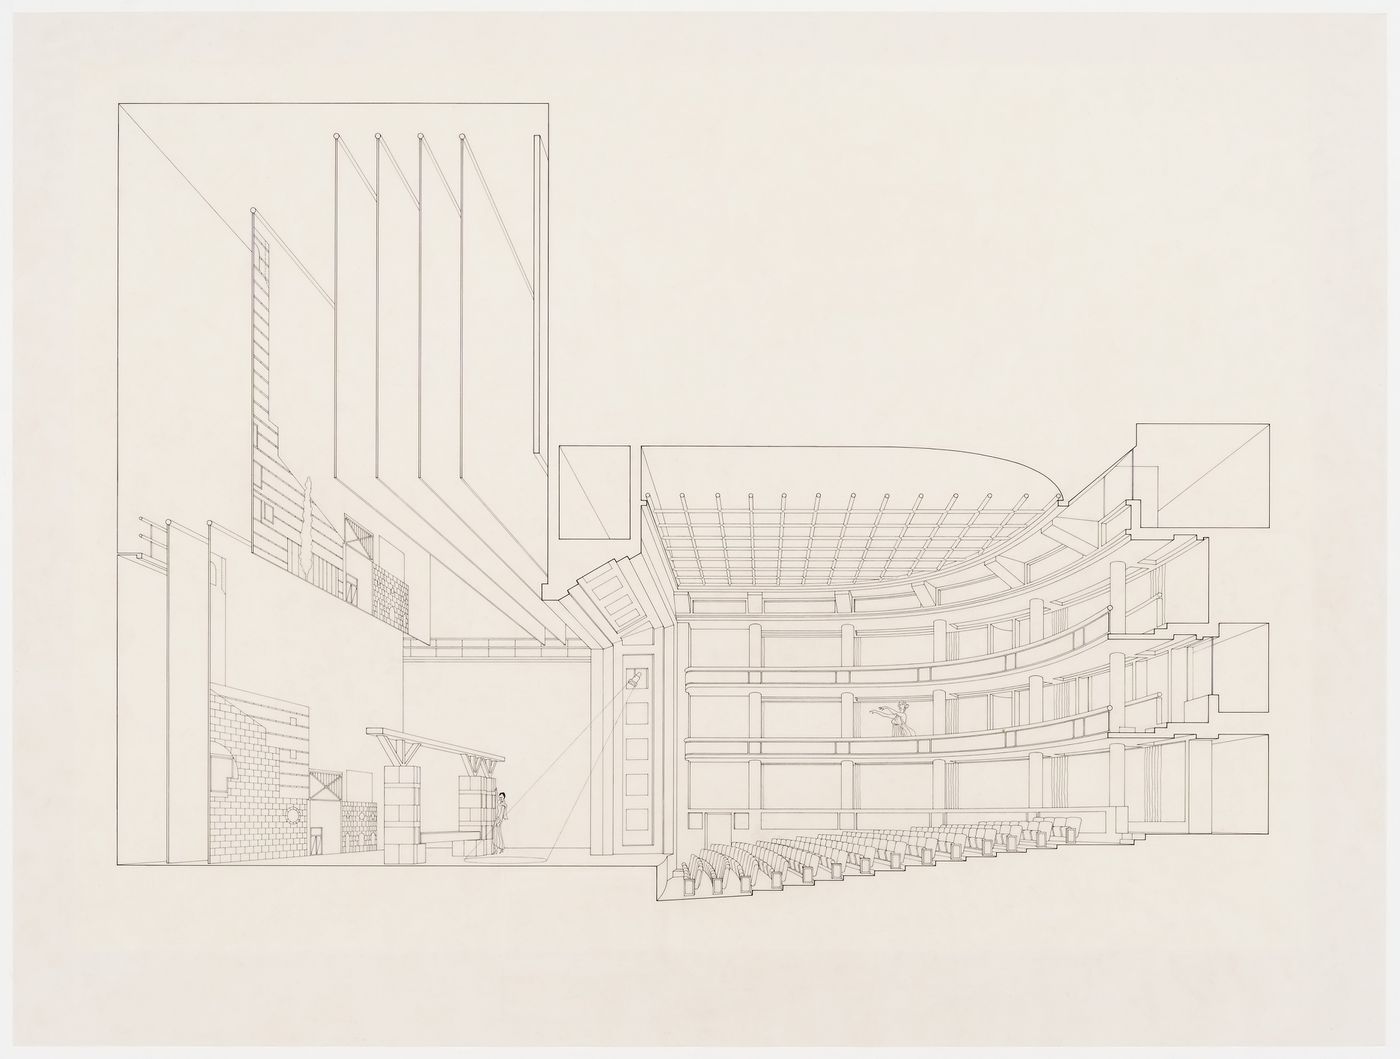 Center for Theatre Arts, Cornell University, Ithaca, New York: cutaway perspective of the theatre